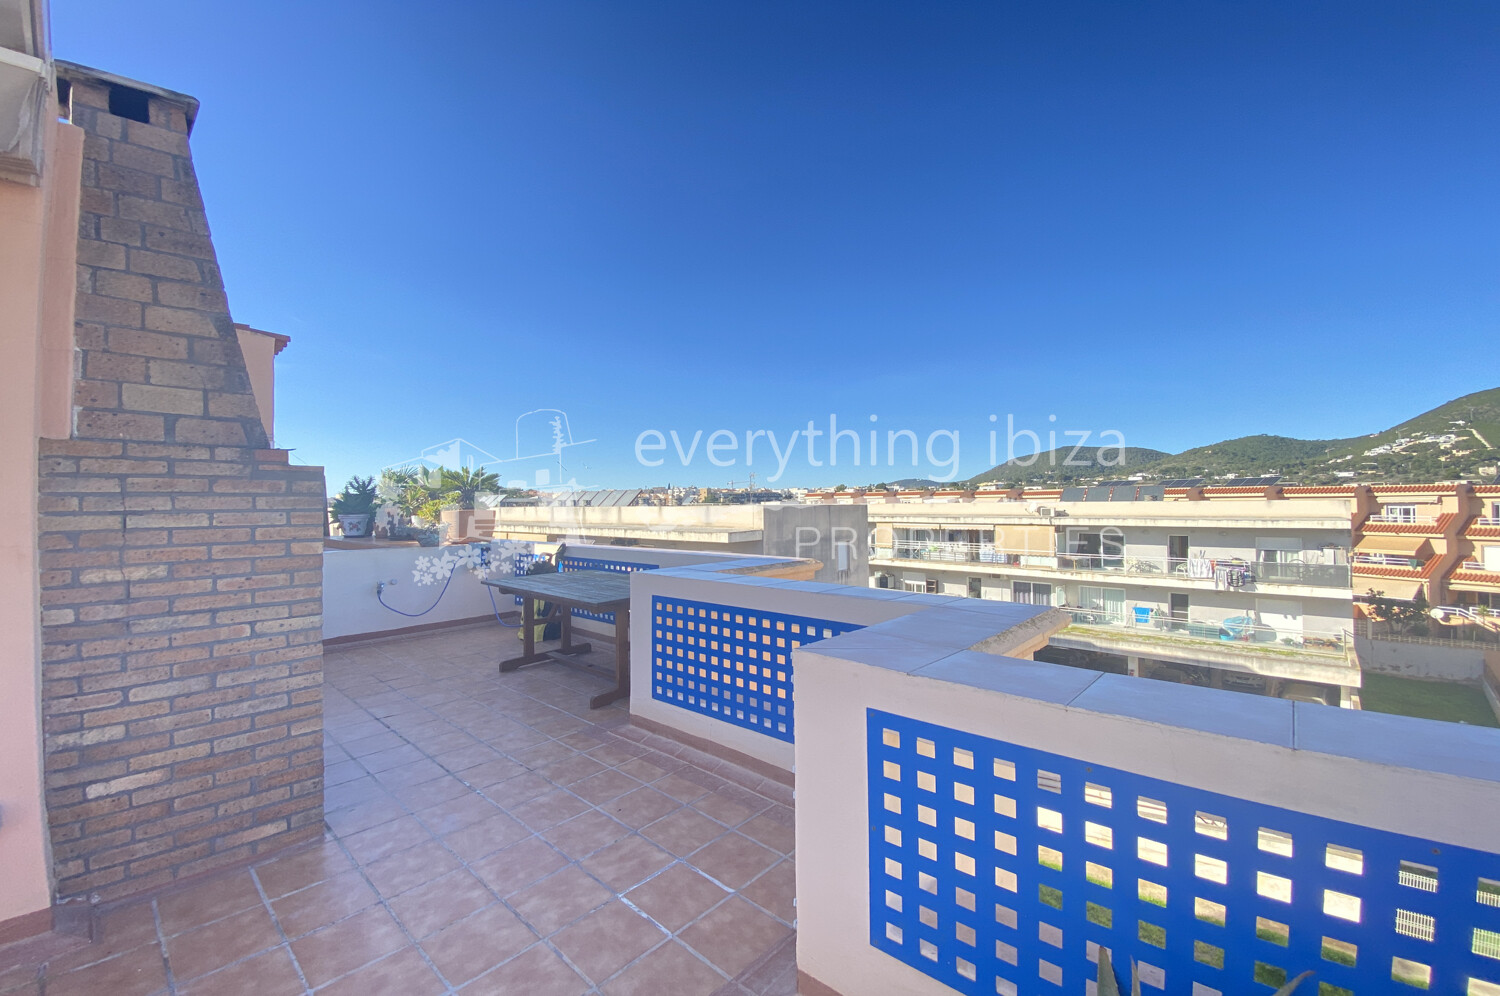 Modern Duplex Apartment with Roof Terrace in Ibiza Town, ref. 1523, for sale in Ibiza by everything ibiza Properties